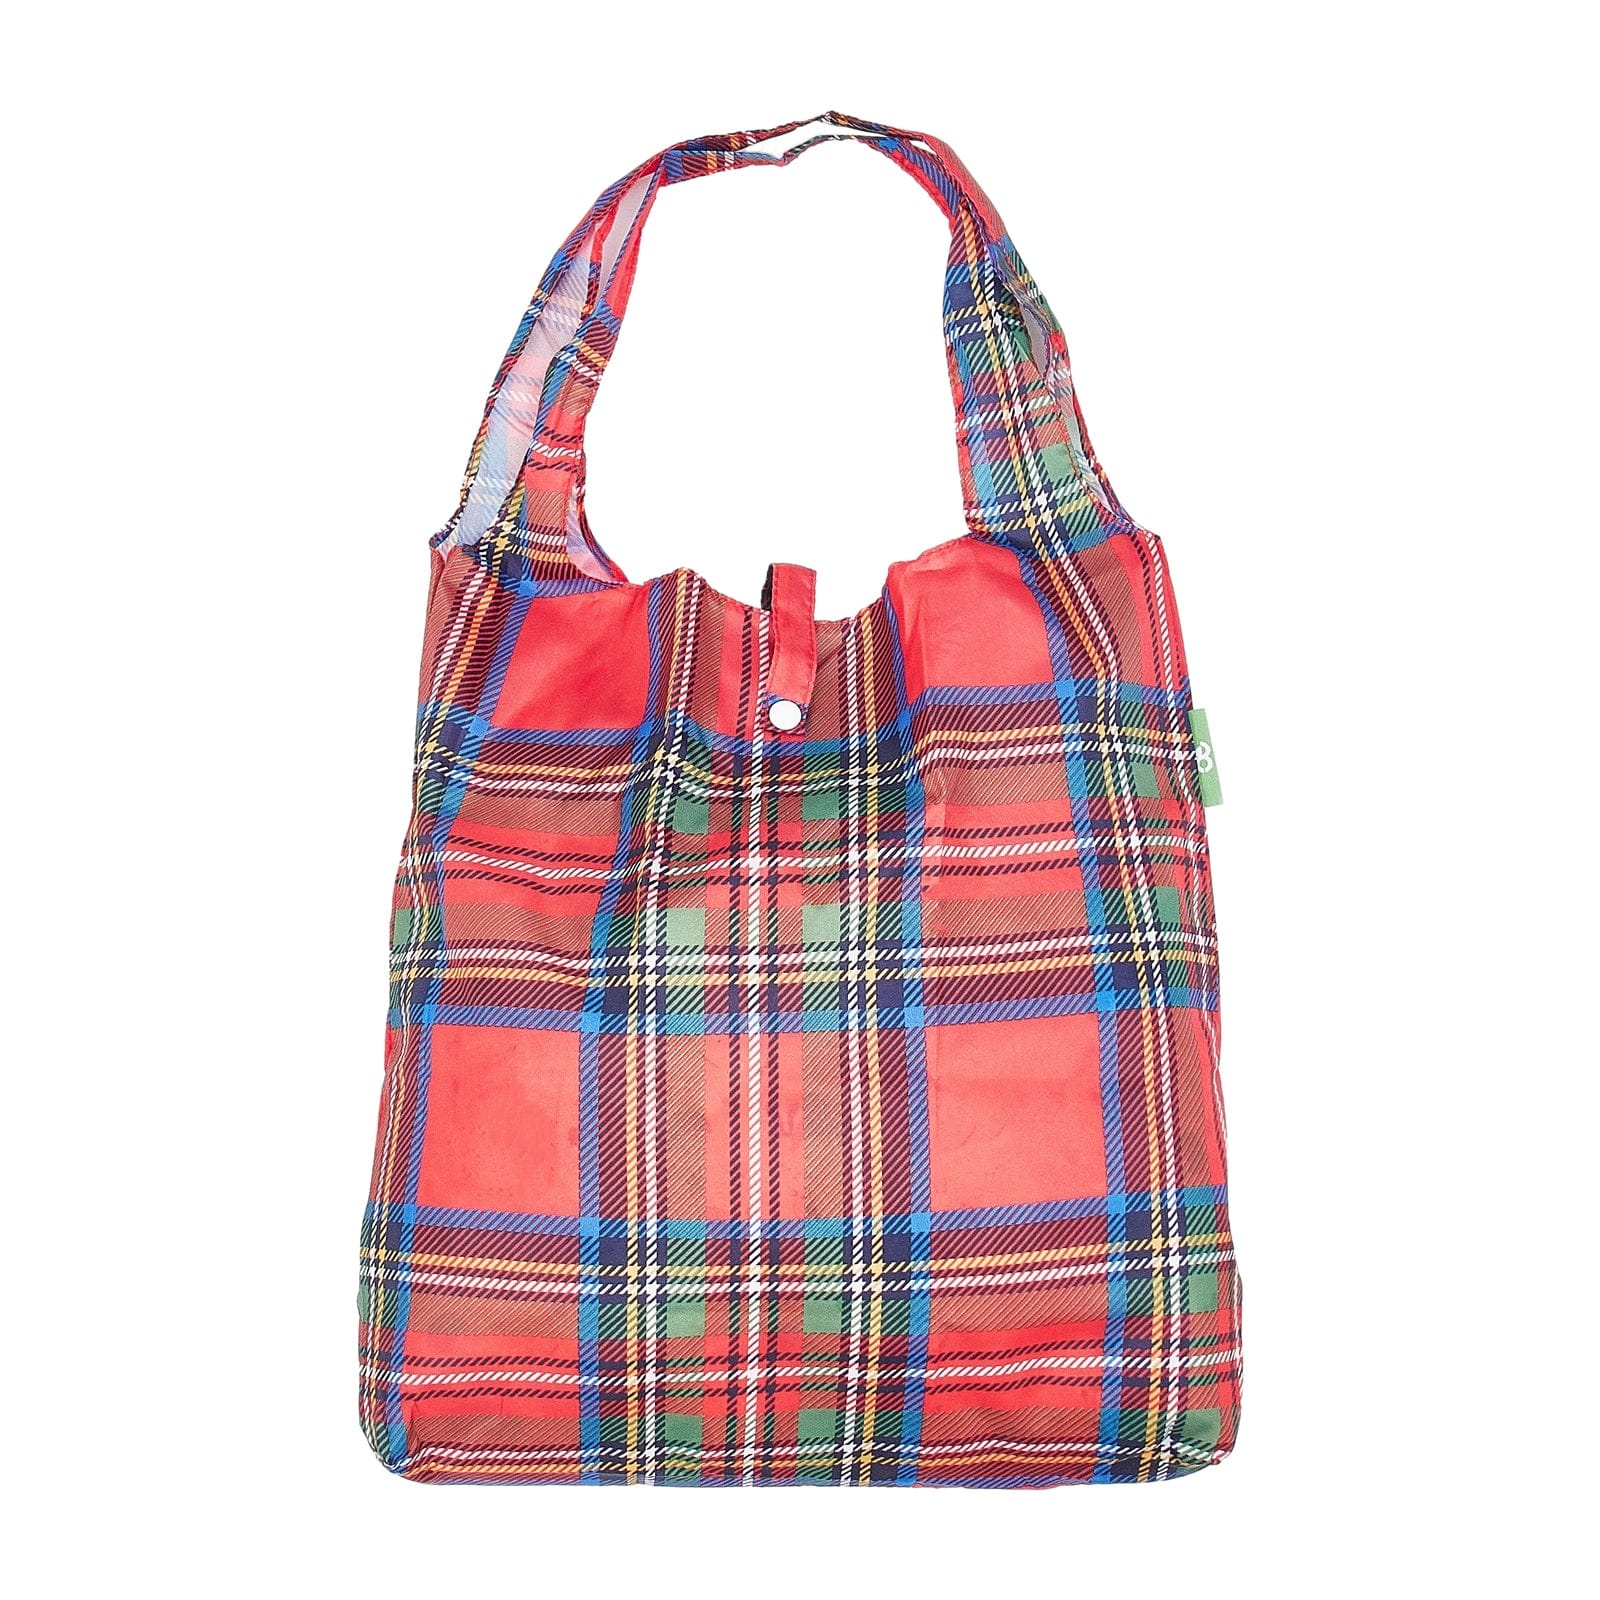 Eco Chic Red Eco Chic Lightweight Foldable Reusable Shopping Bag Tartan